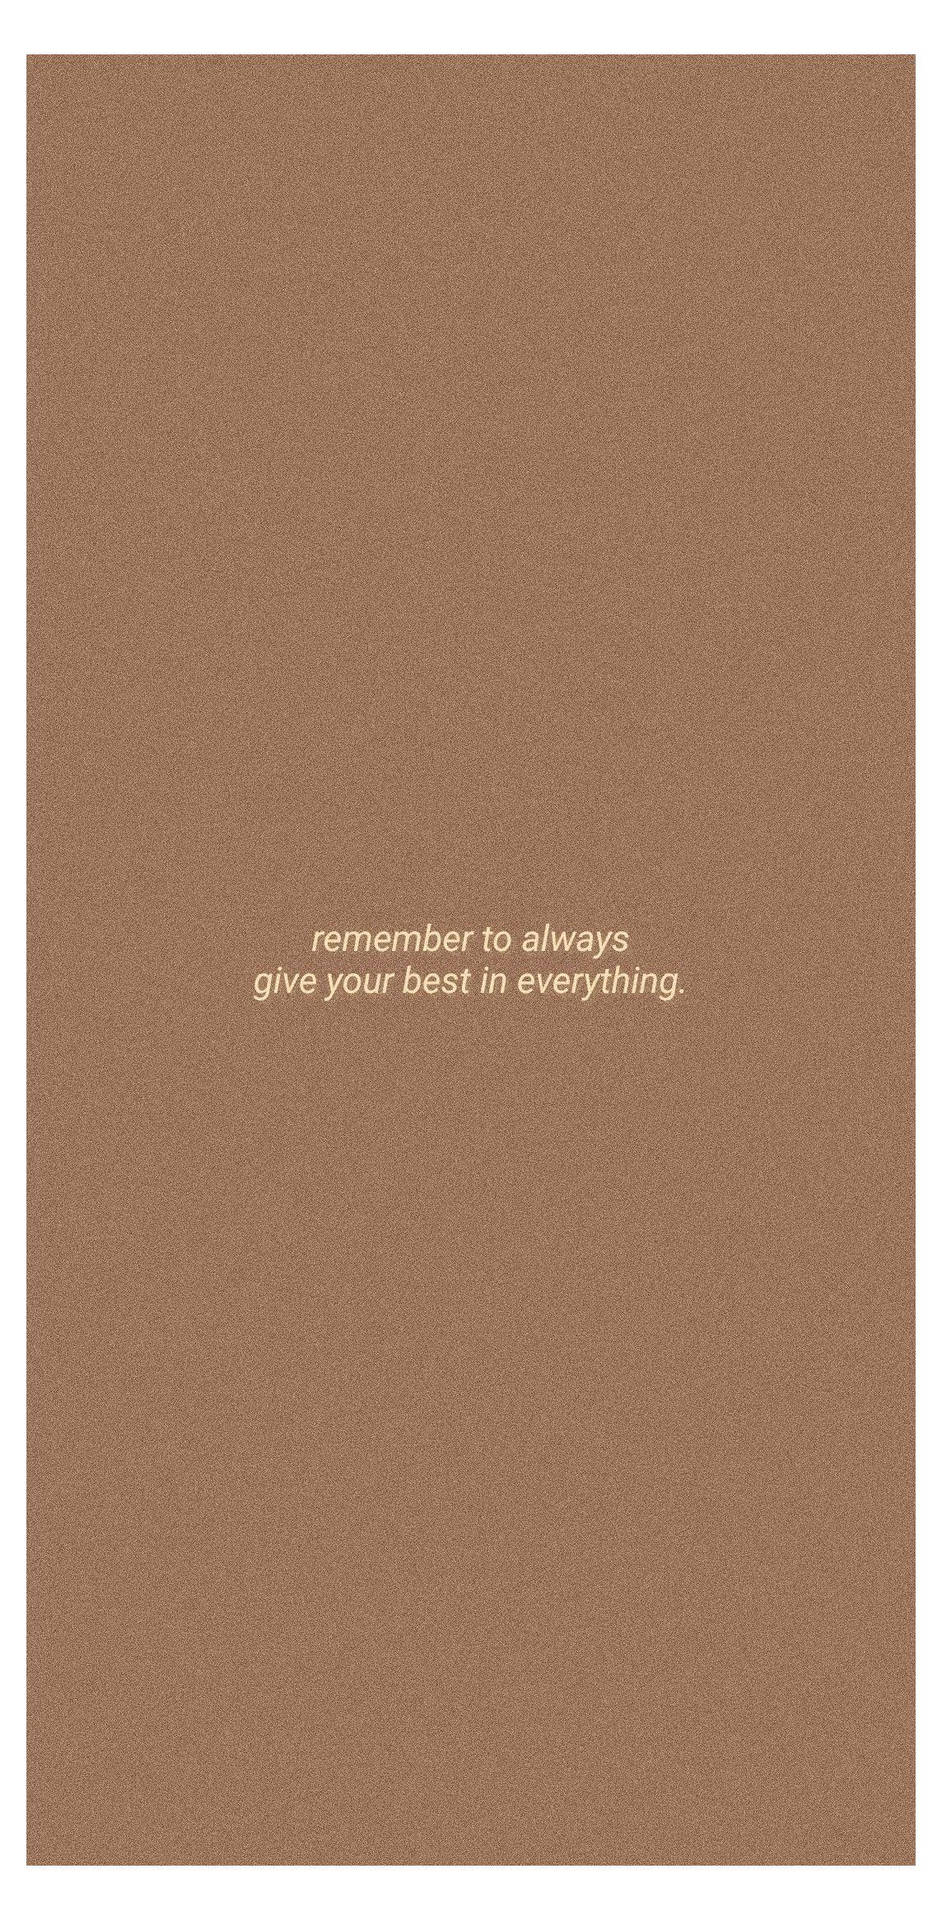 Remembrance of always giving your death in everything - Minimalist beige